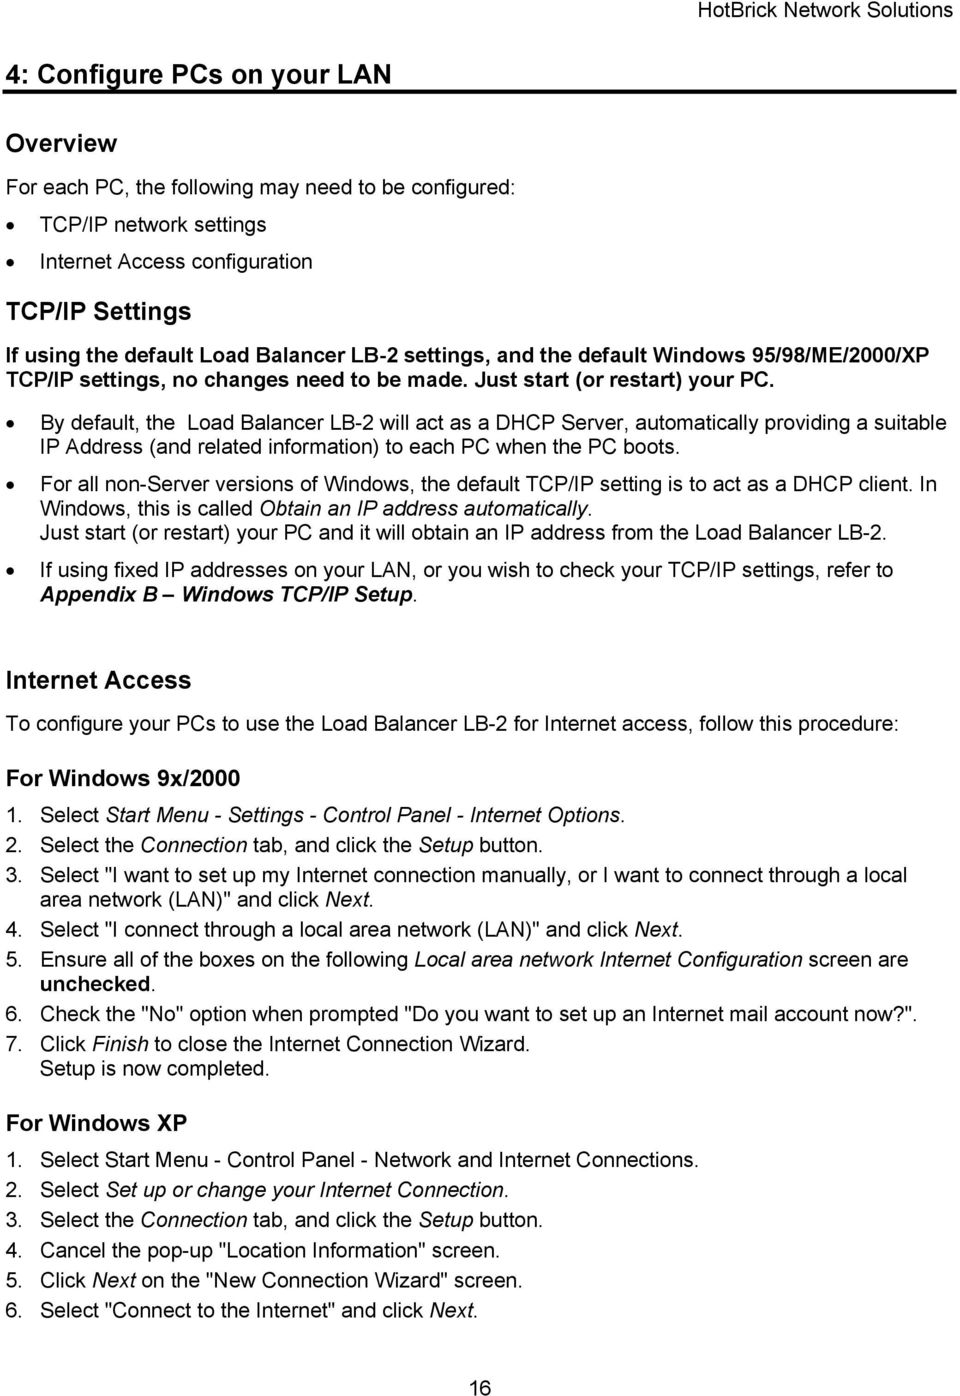 By default, the Load Balancer LB-2 will act as a DHCP Server, automatically providing a suitable IP Address (and related information) to each PC when the PC boots.